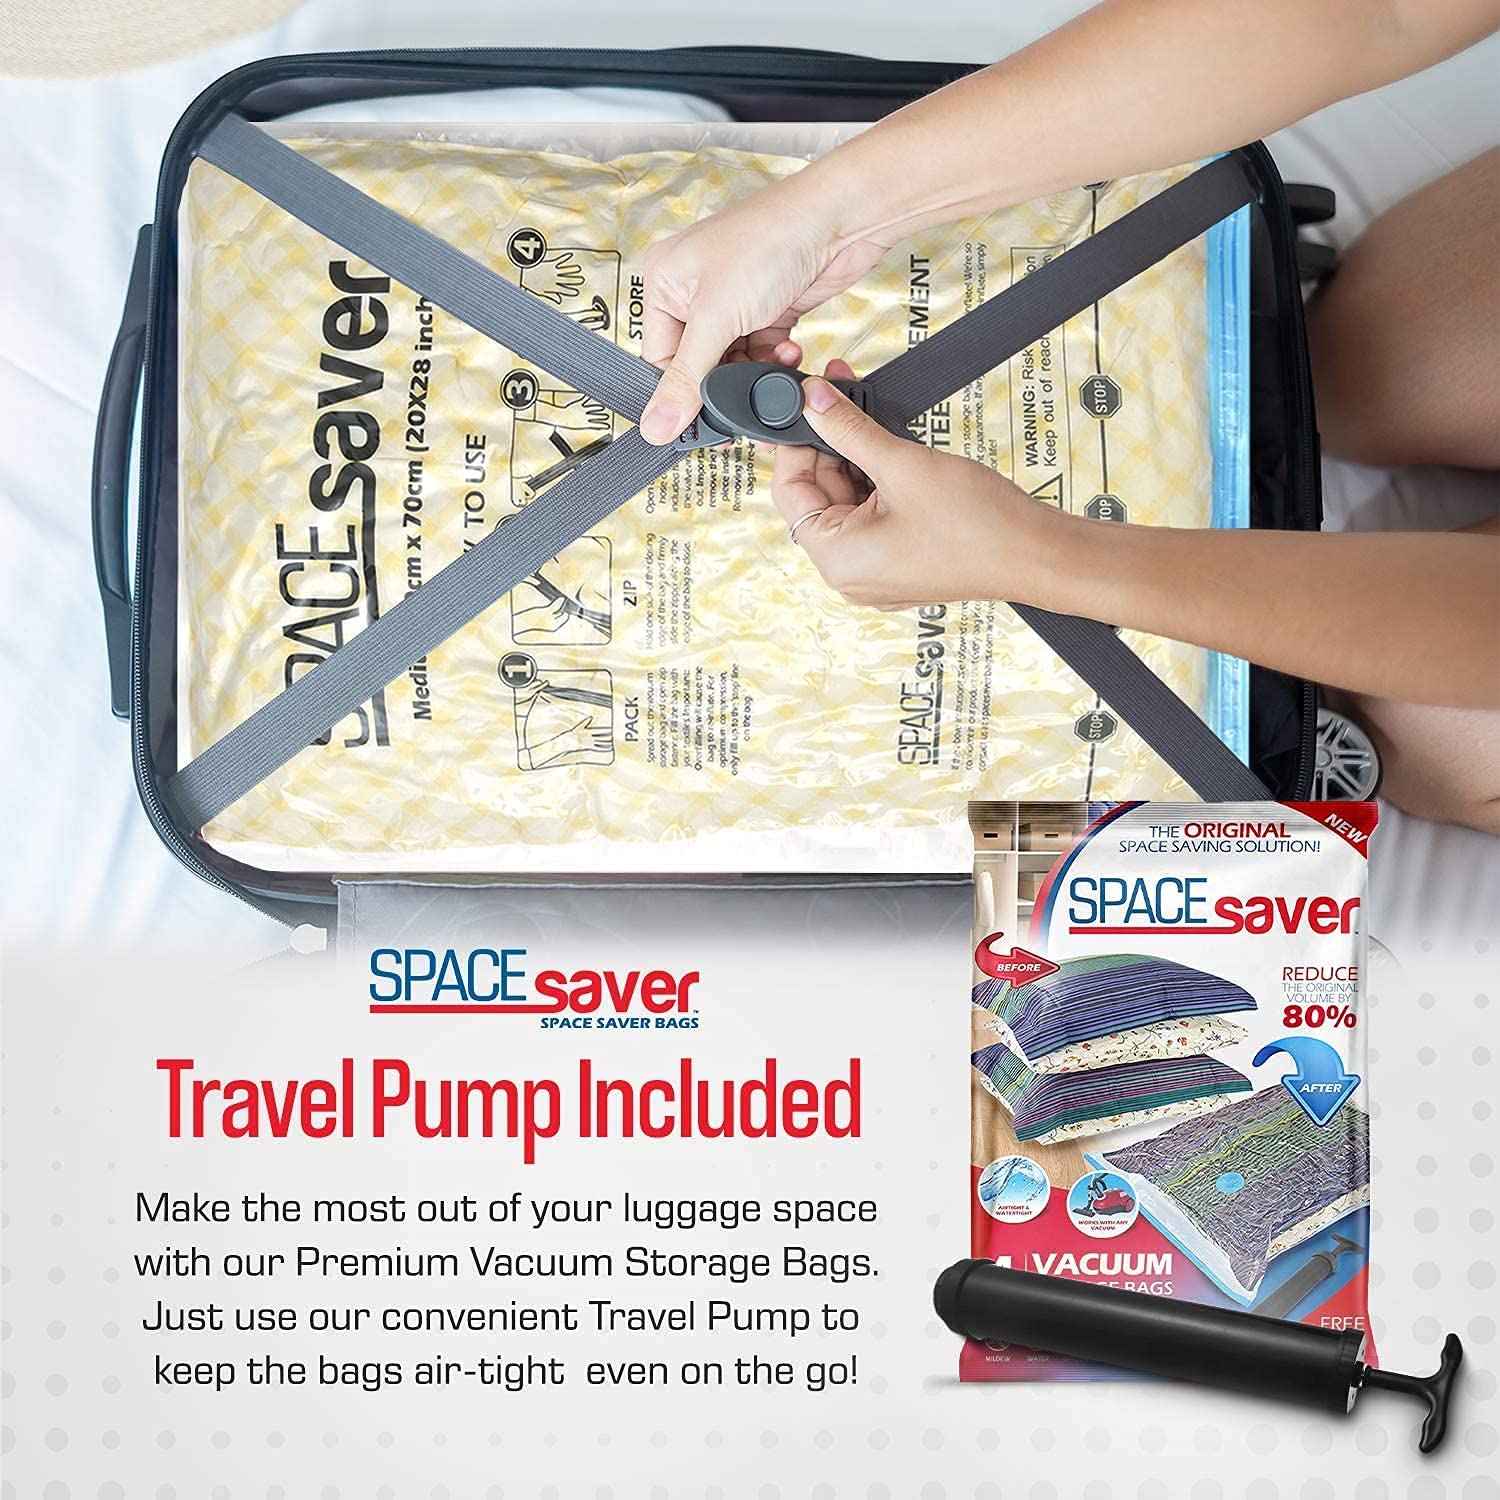 Spacesaver Premium *Jumbo* Vacuum Storage Bags (Works with Any Vacuum Cleaner + Free Hand-Pump for Travel!) Double-Zip Seal and Triple Seal Turbo-Valve for 80% More Compression! - image 5 of 6